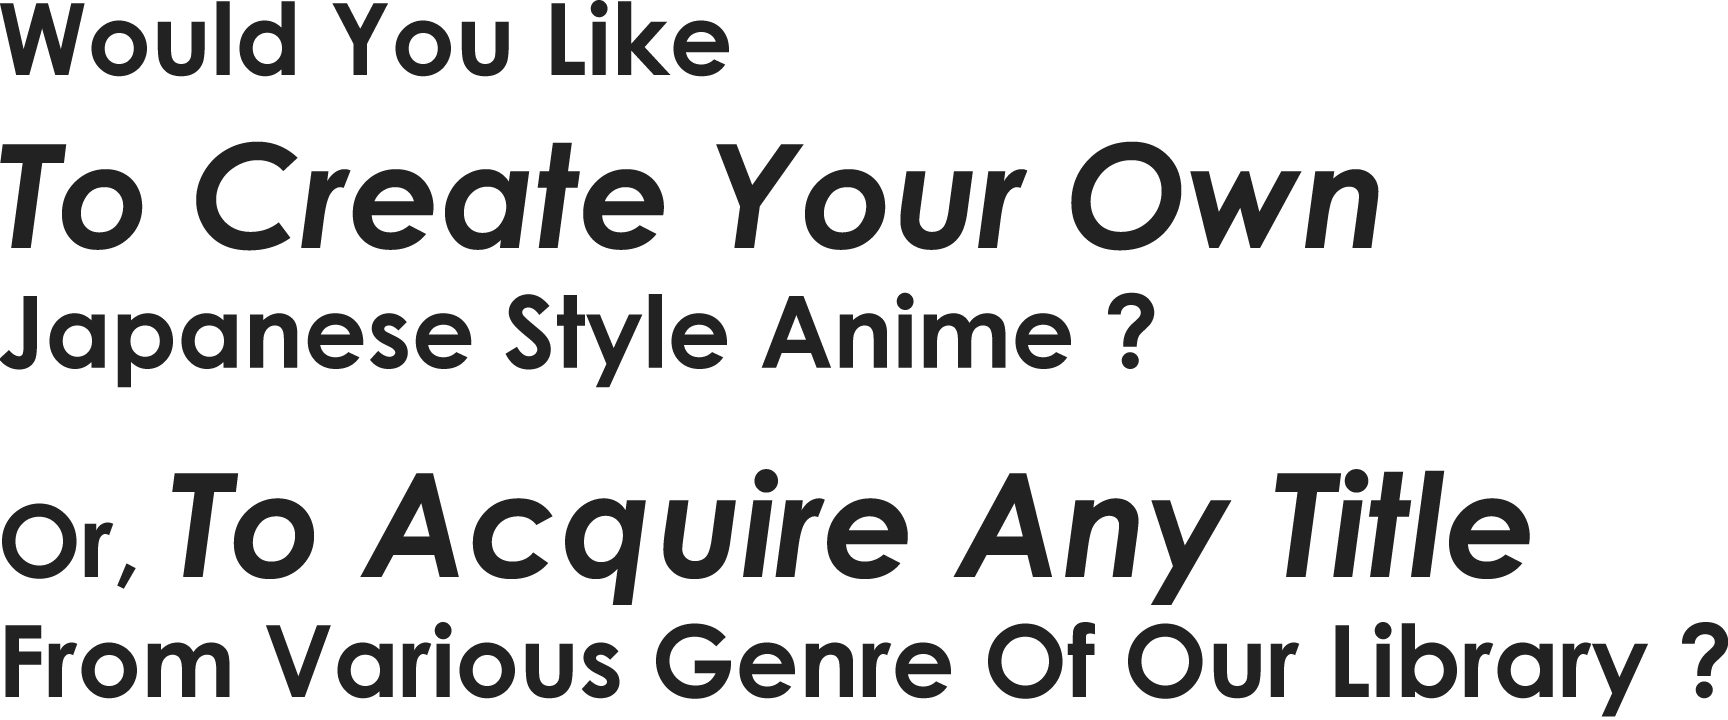 Would You Like To Create Your Own Japanese Style Anime ?